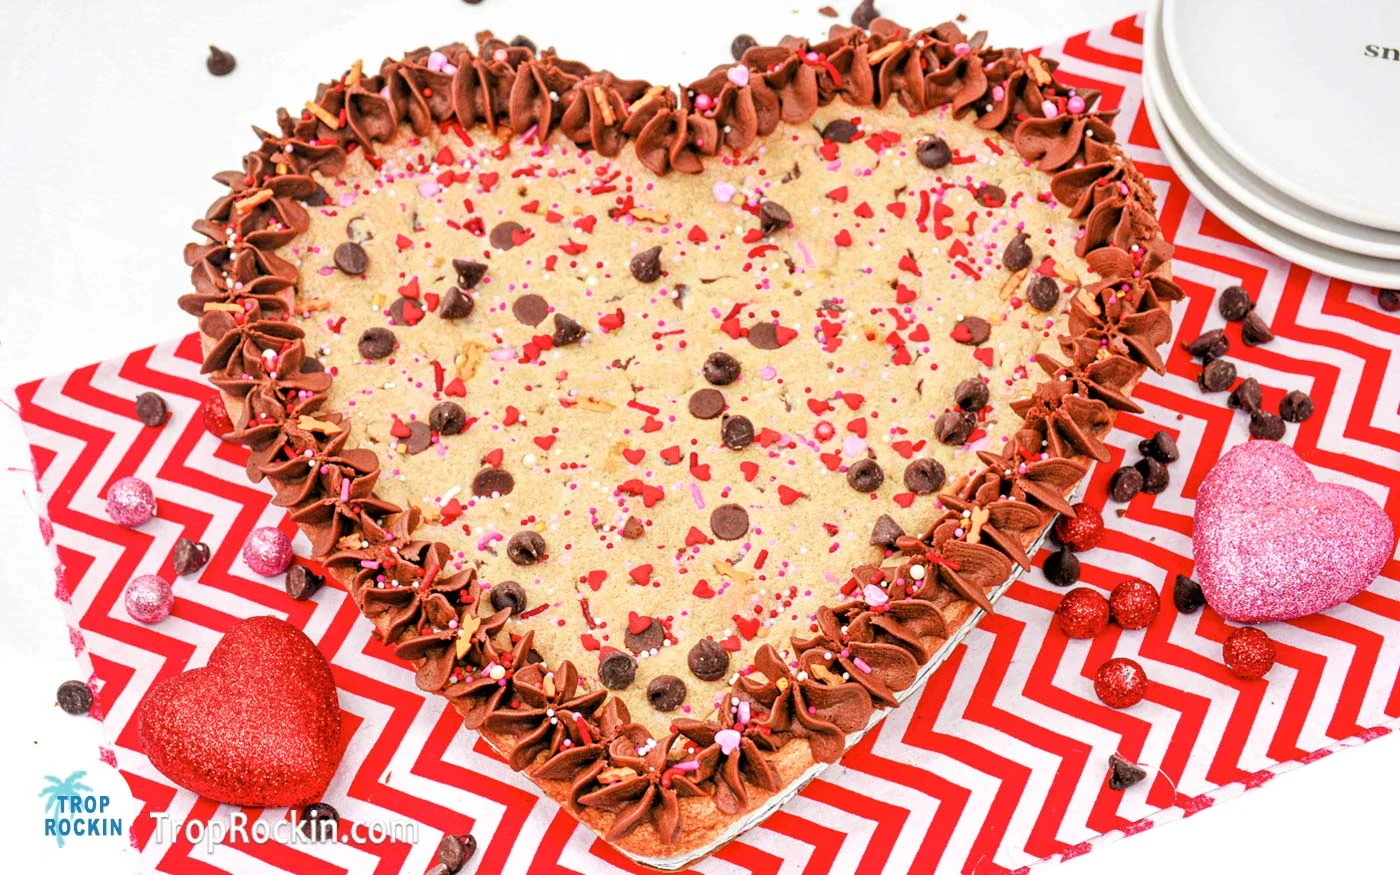 Valentines Cookie Cake heart shaped with chocolate chips, frosting and sprinkles.